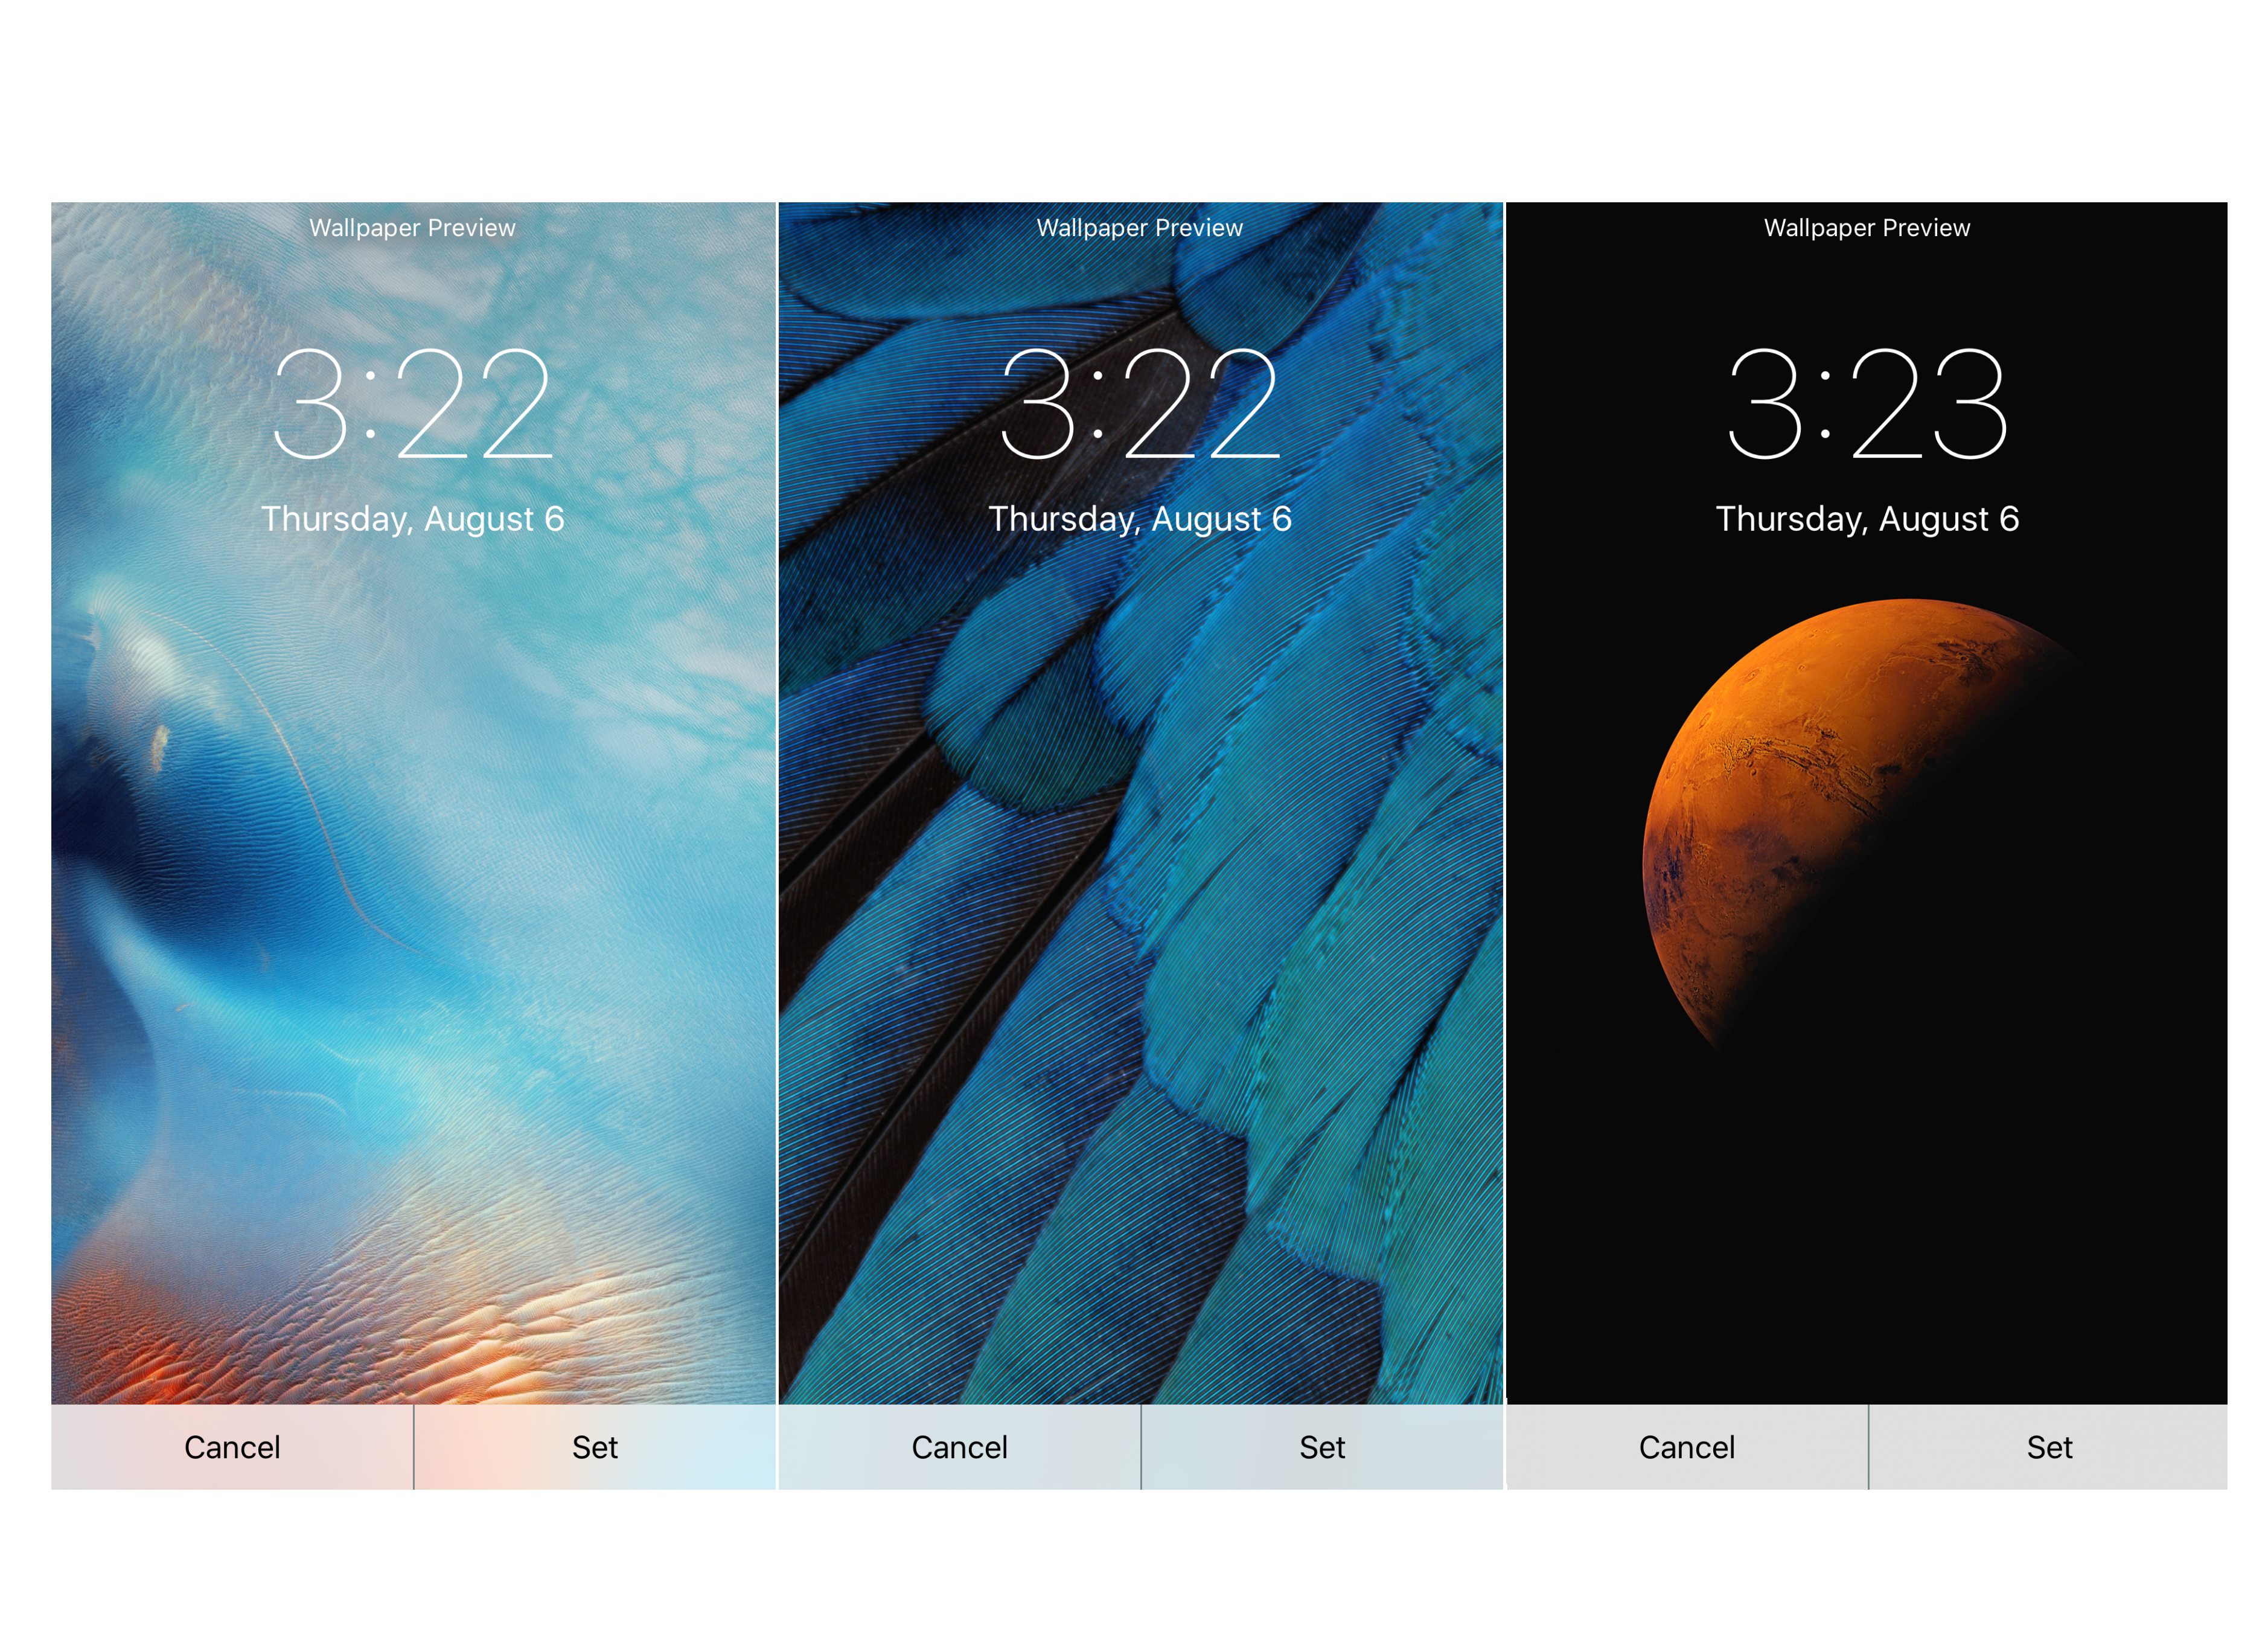 ios 9 wallpapers make your iphone look brand new image 1